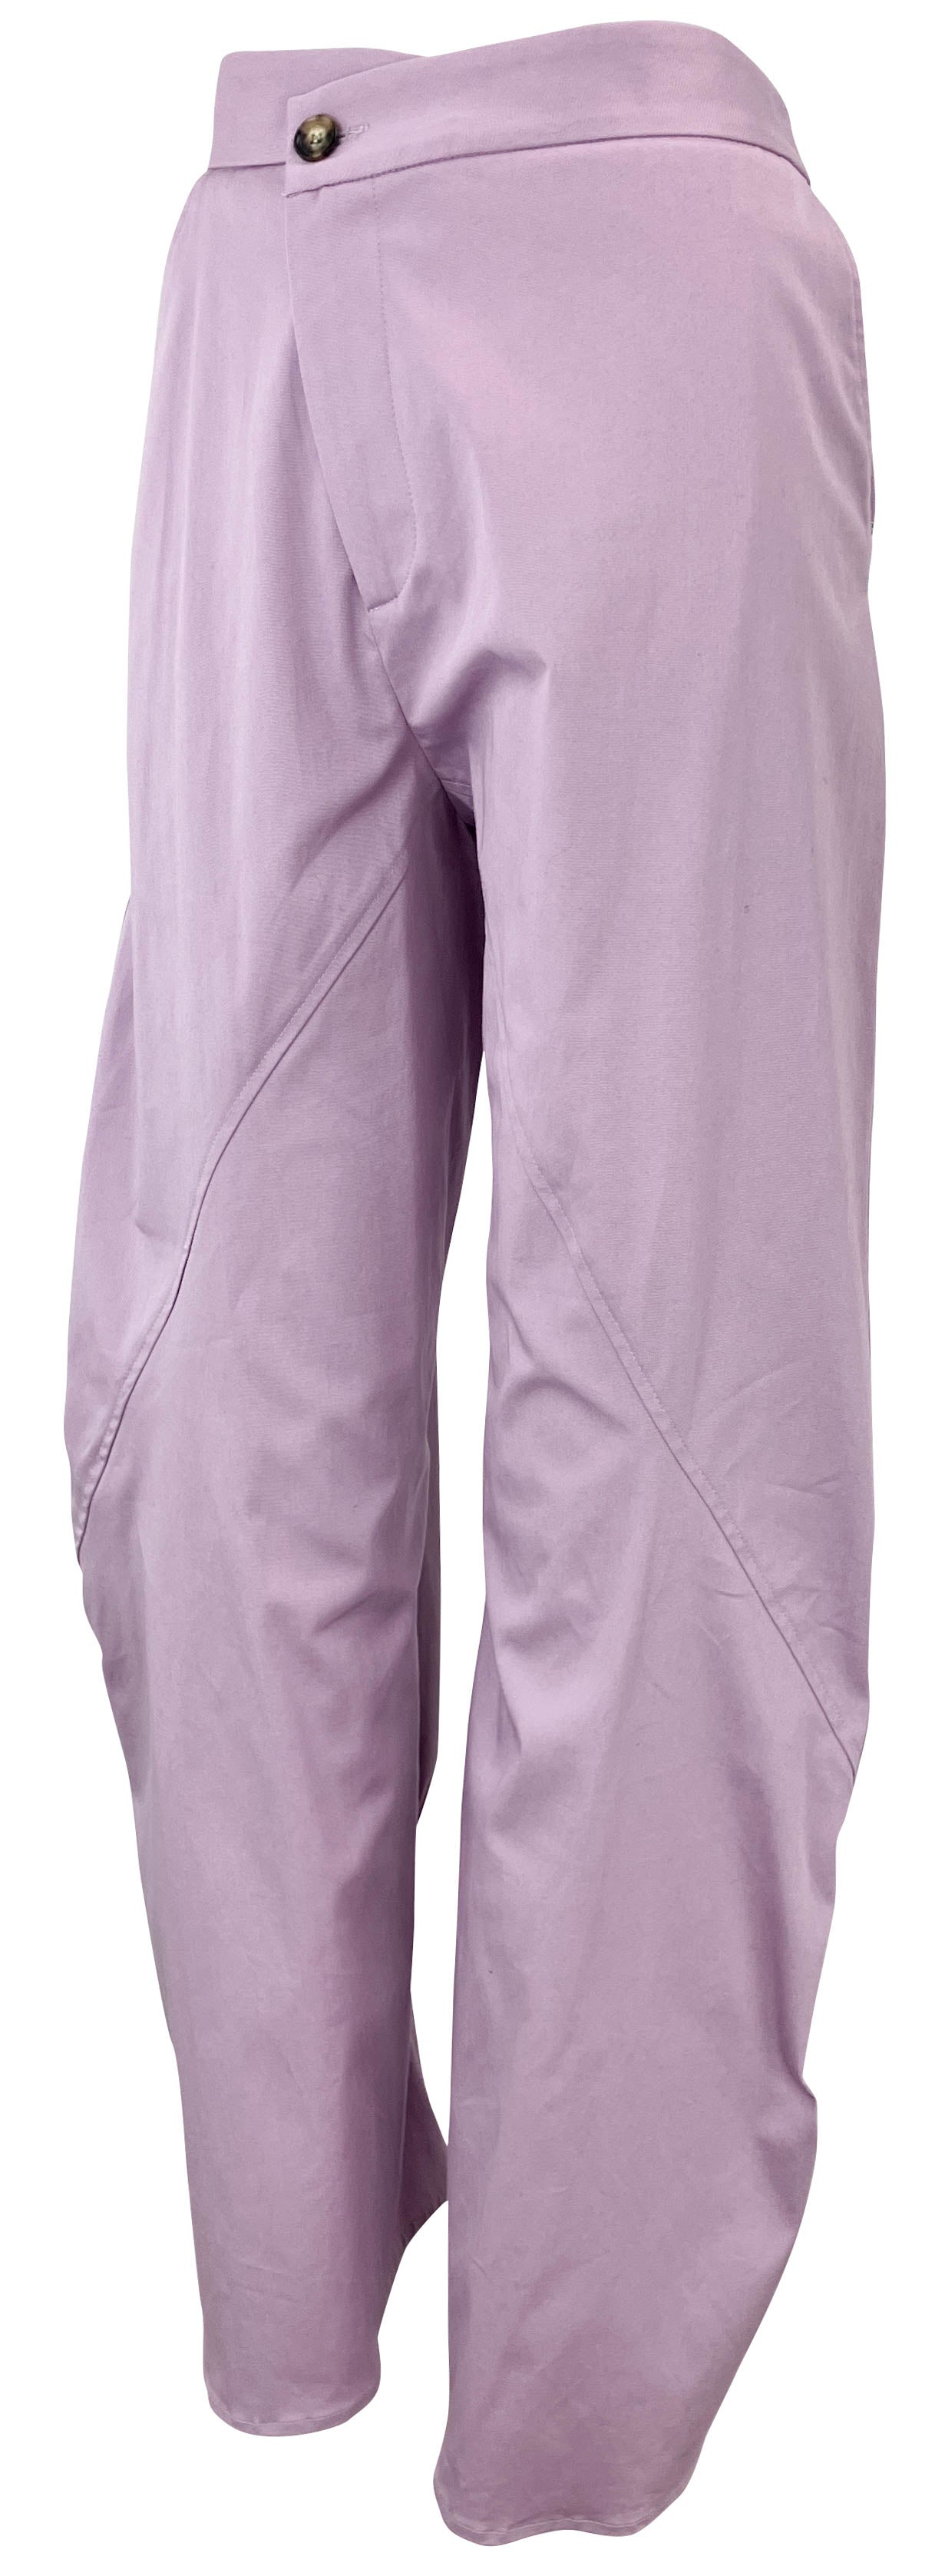 JW Anderson Off-Center Seam Trousers in Lilac - Discounts on JW Anderson at UAL